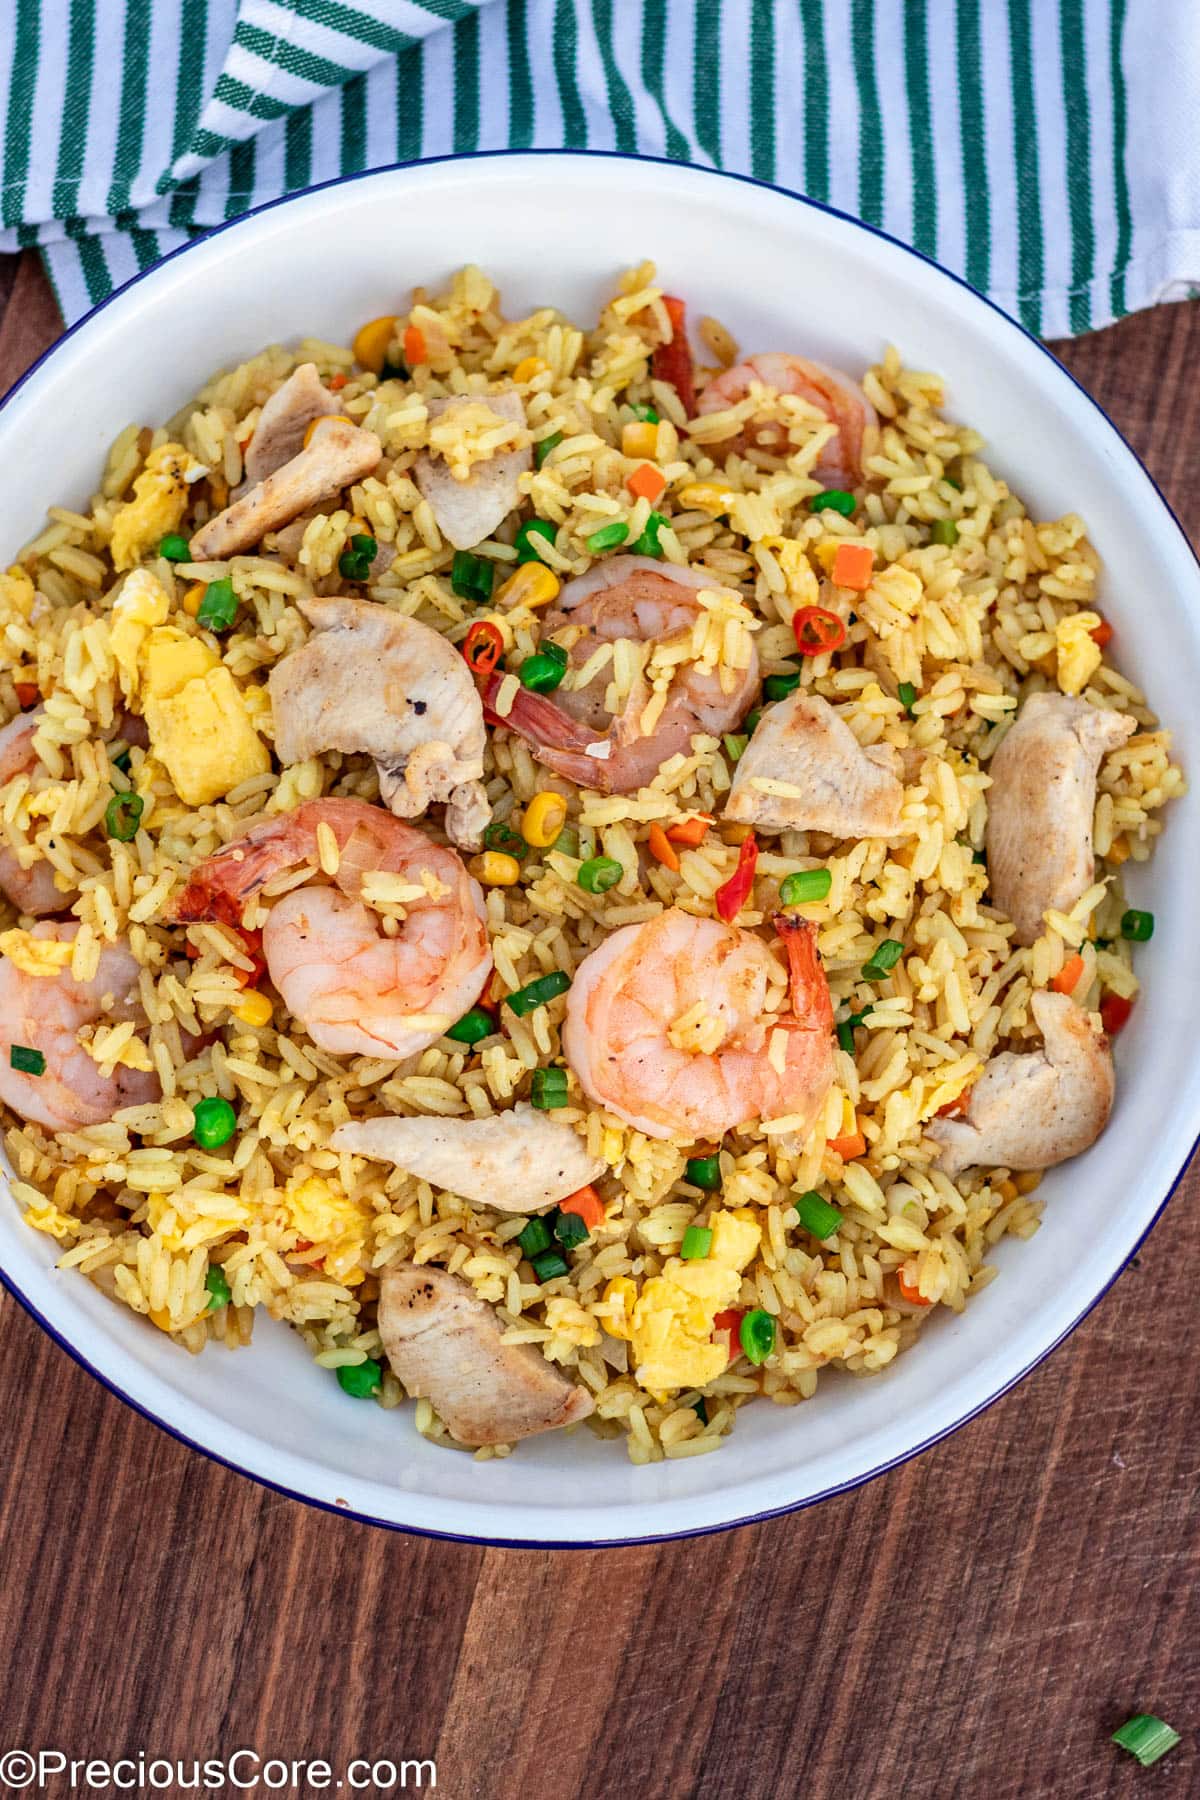 Fried rice in a plate, topped with chicken and shrimp.